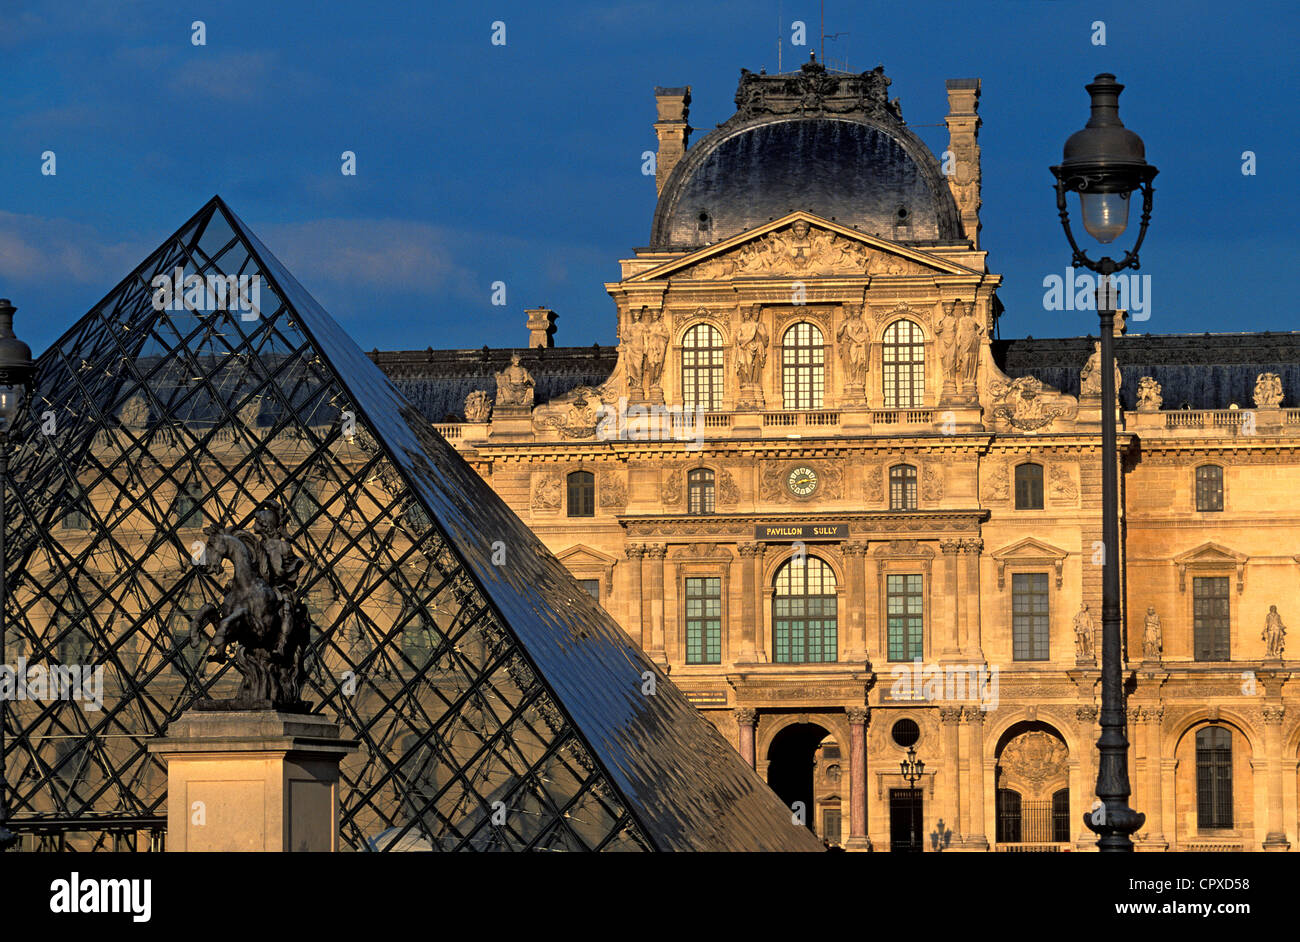 France, Paris, Musee du Louvre, Cour Napoleon, the Pyramid by architect Ieoh Ming Pei Stock Photo